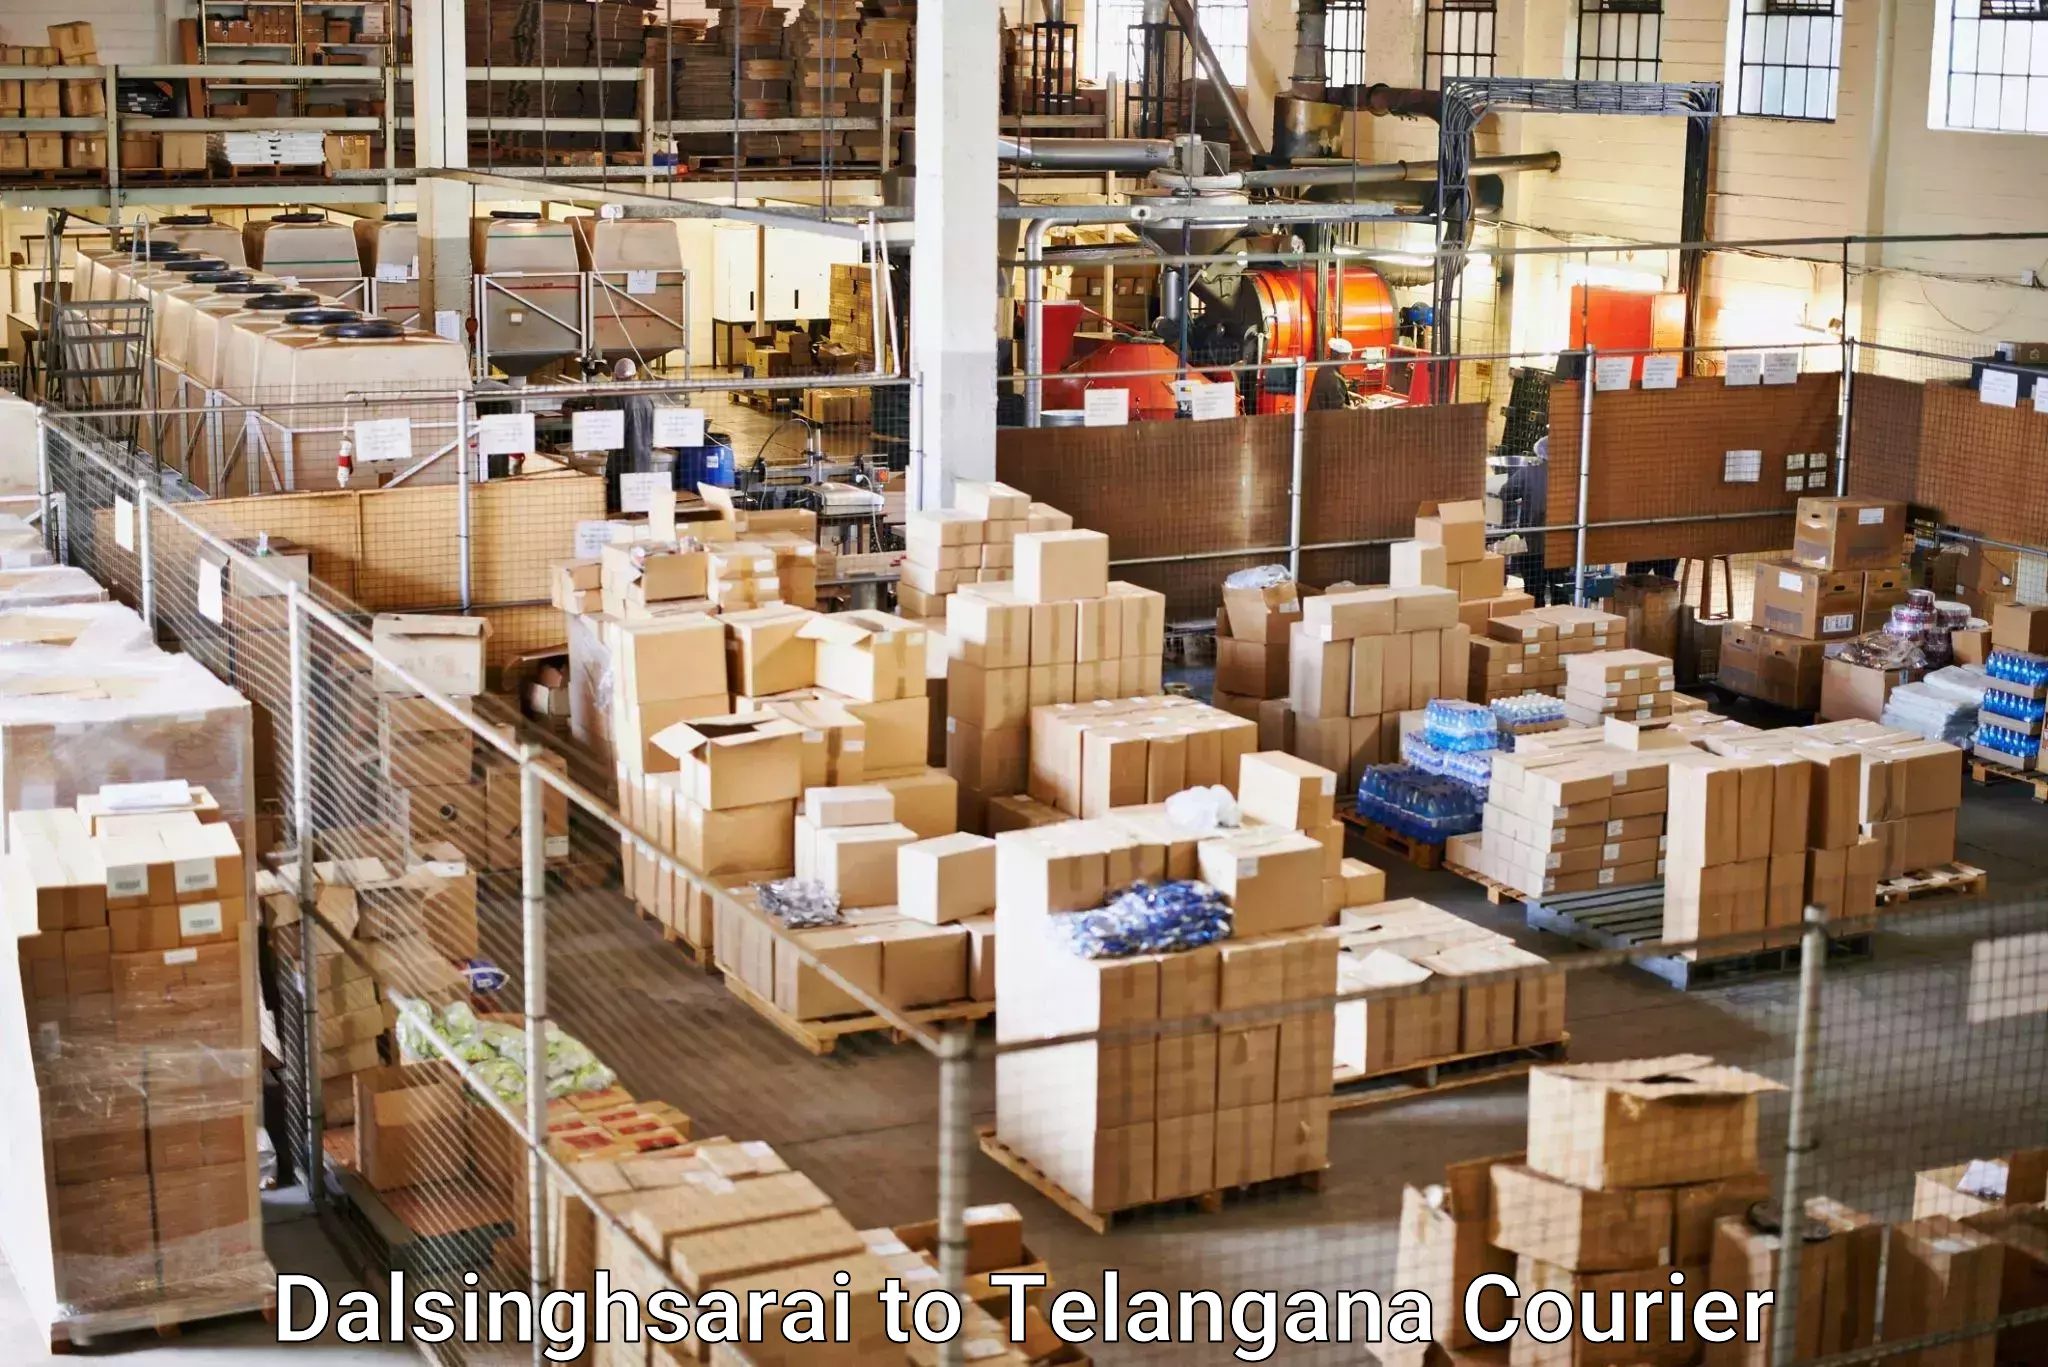 Affordable shipping solutions Dalsinghsarai to Narayanpet